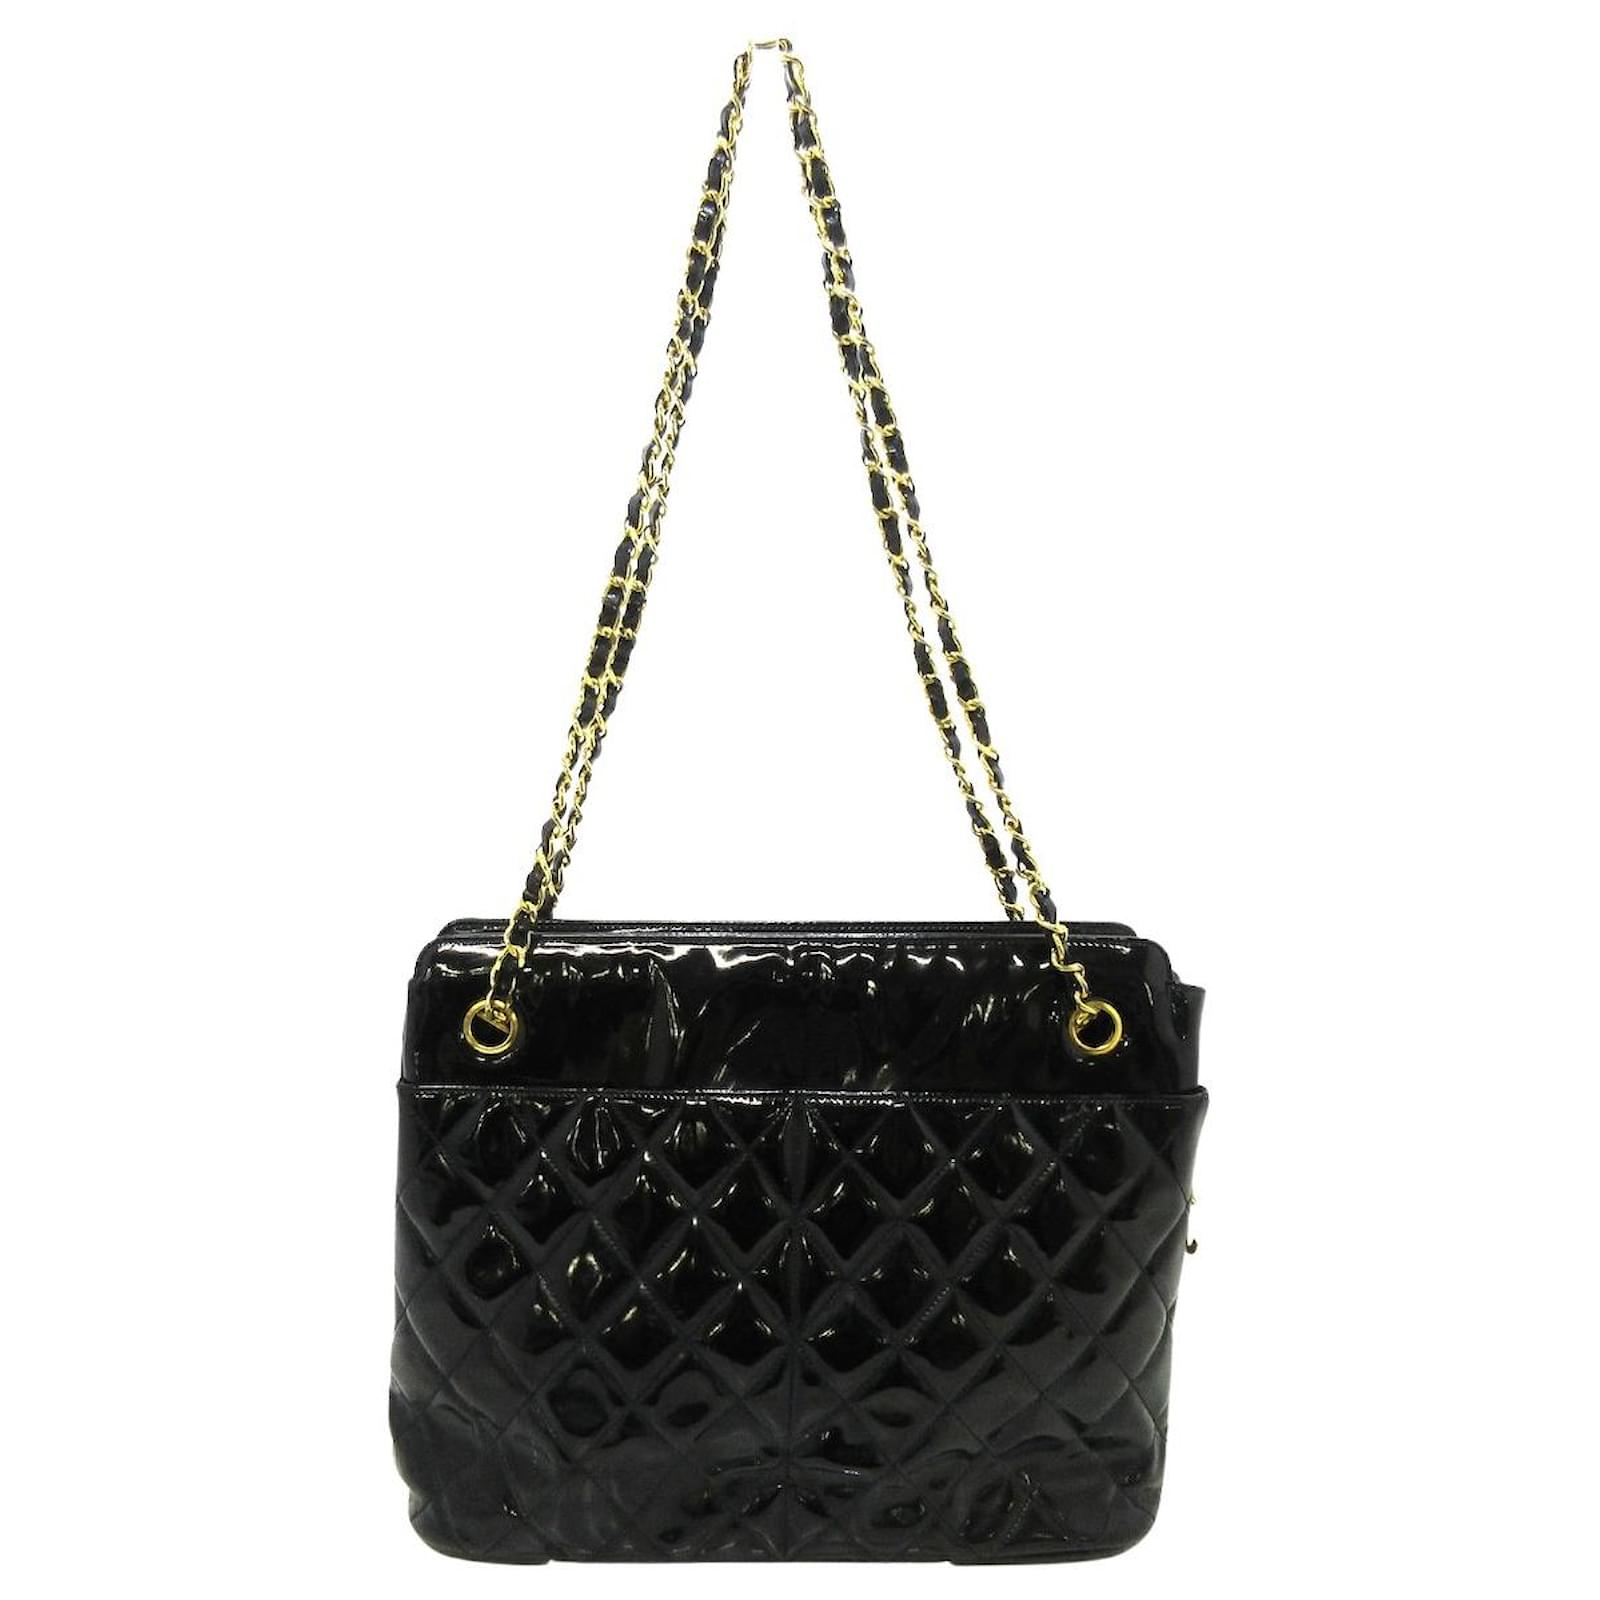 Chanel Vintage - Patent Leather Chain Tote Bag - Black - Patent